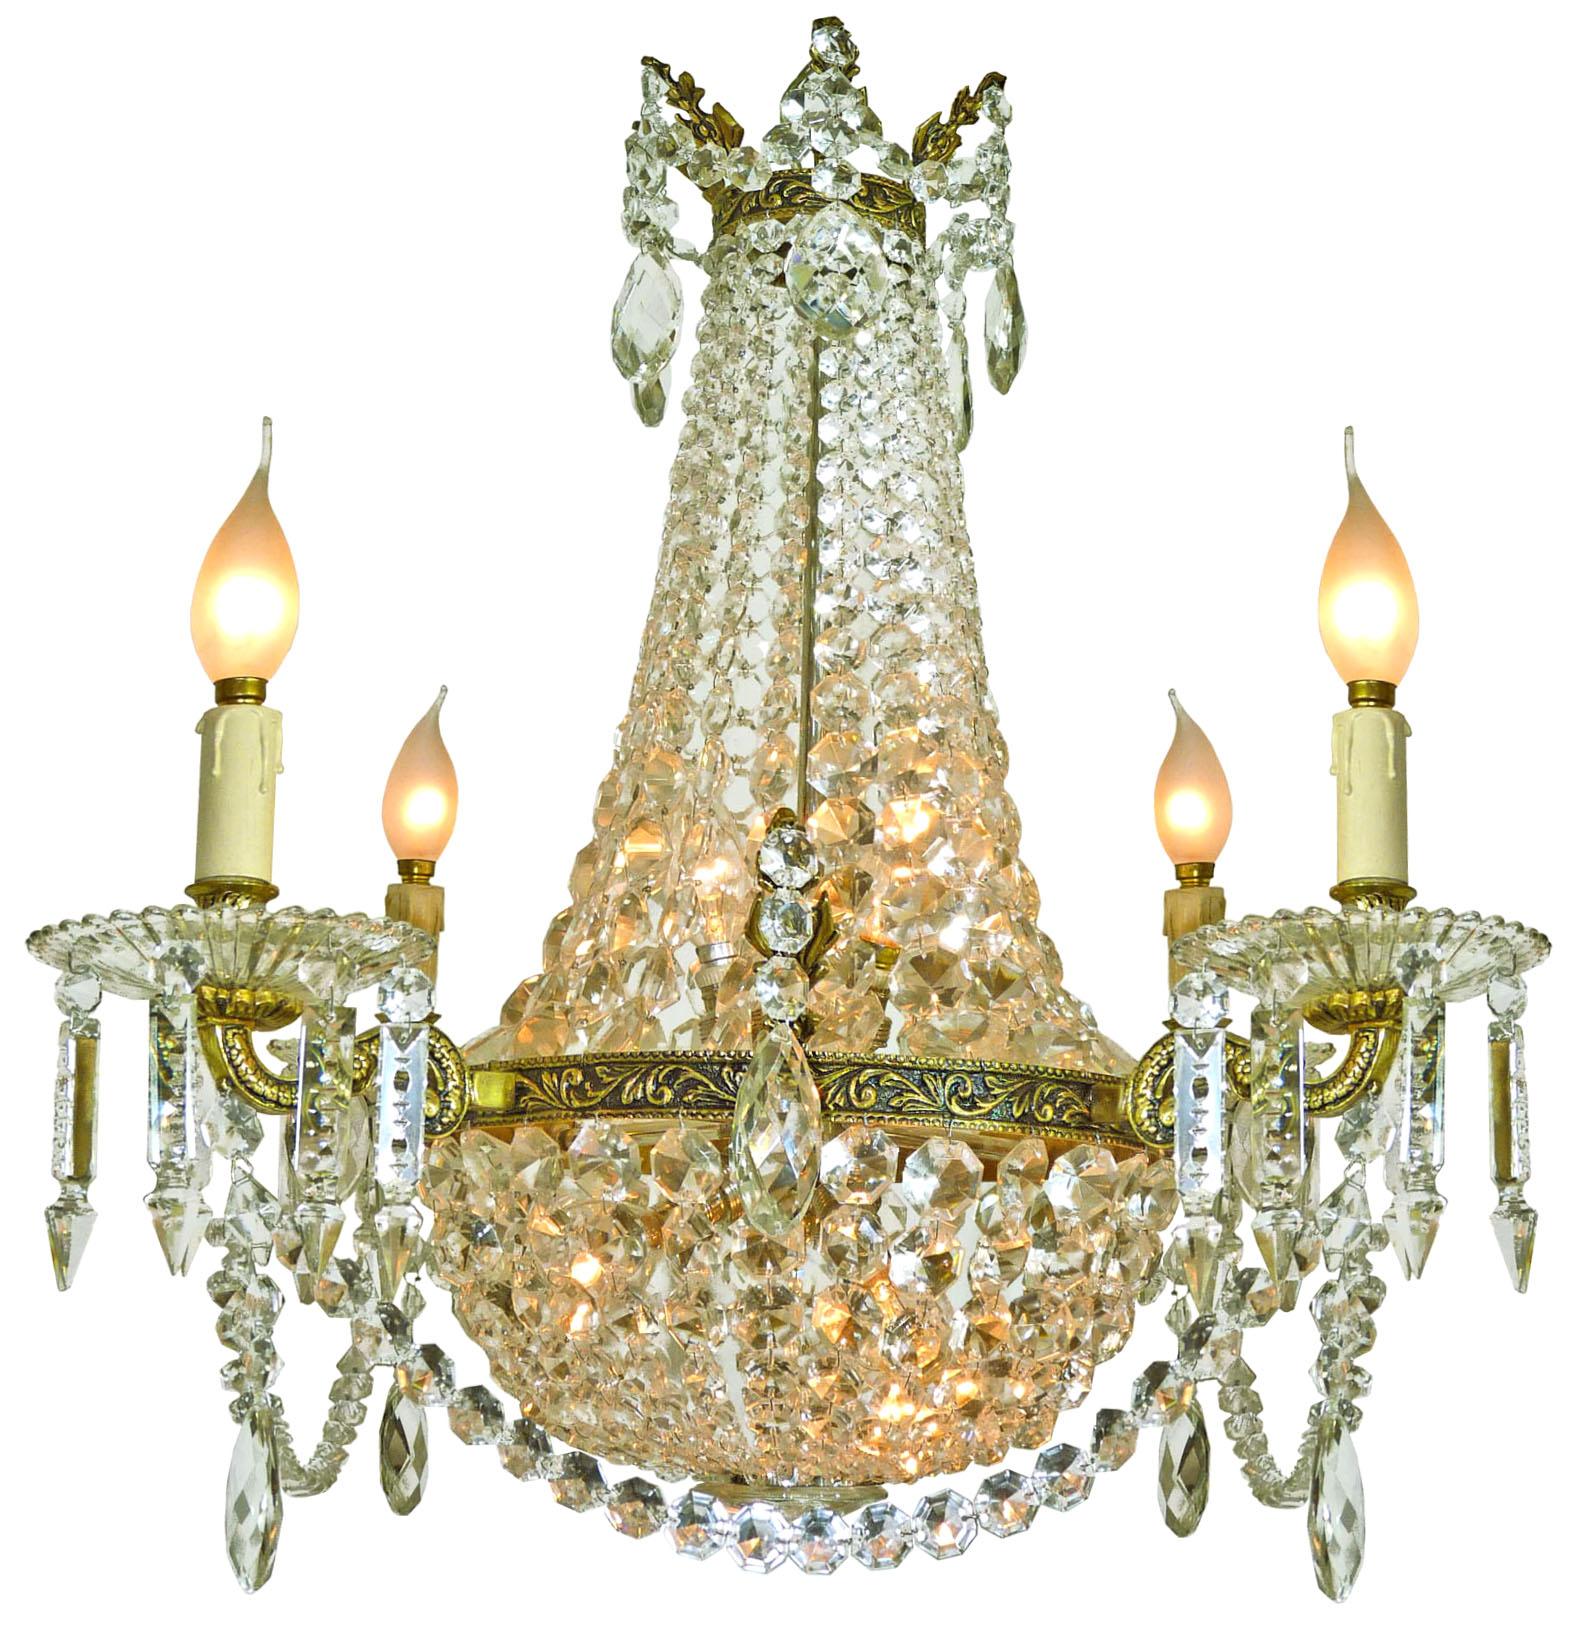 Stunning French Empire cut crystal and bronze Sac-de-Pearl, ten-light chandelier with crystal drops and swags
Measures:
Diameter 27.5 in/ 70 cm
Height 43.3 in (27.5 in+ 15.7 in/chain) / 110 cm (70 cm + 40 cm/chain)
Weight: 26 lb/12 Kg
Ten light